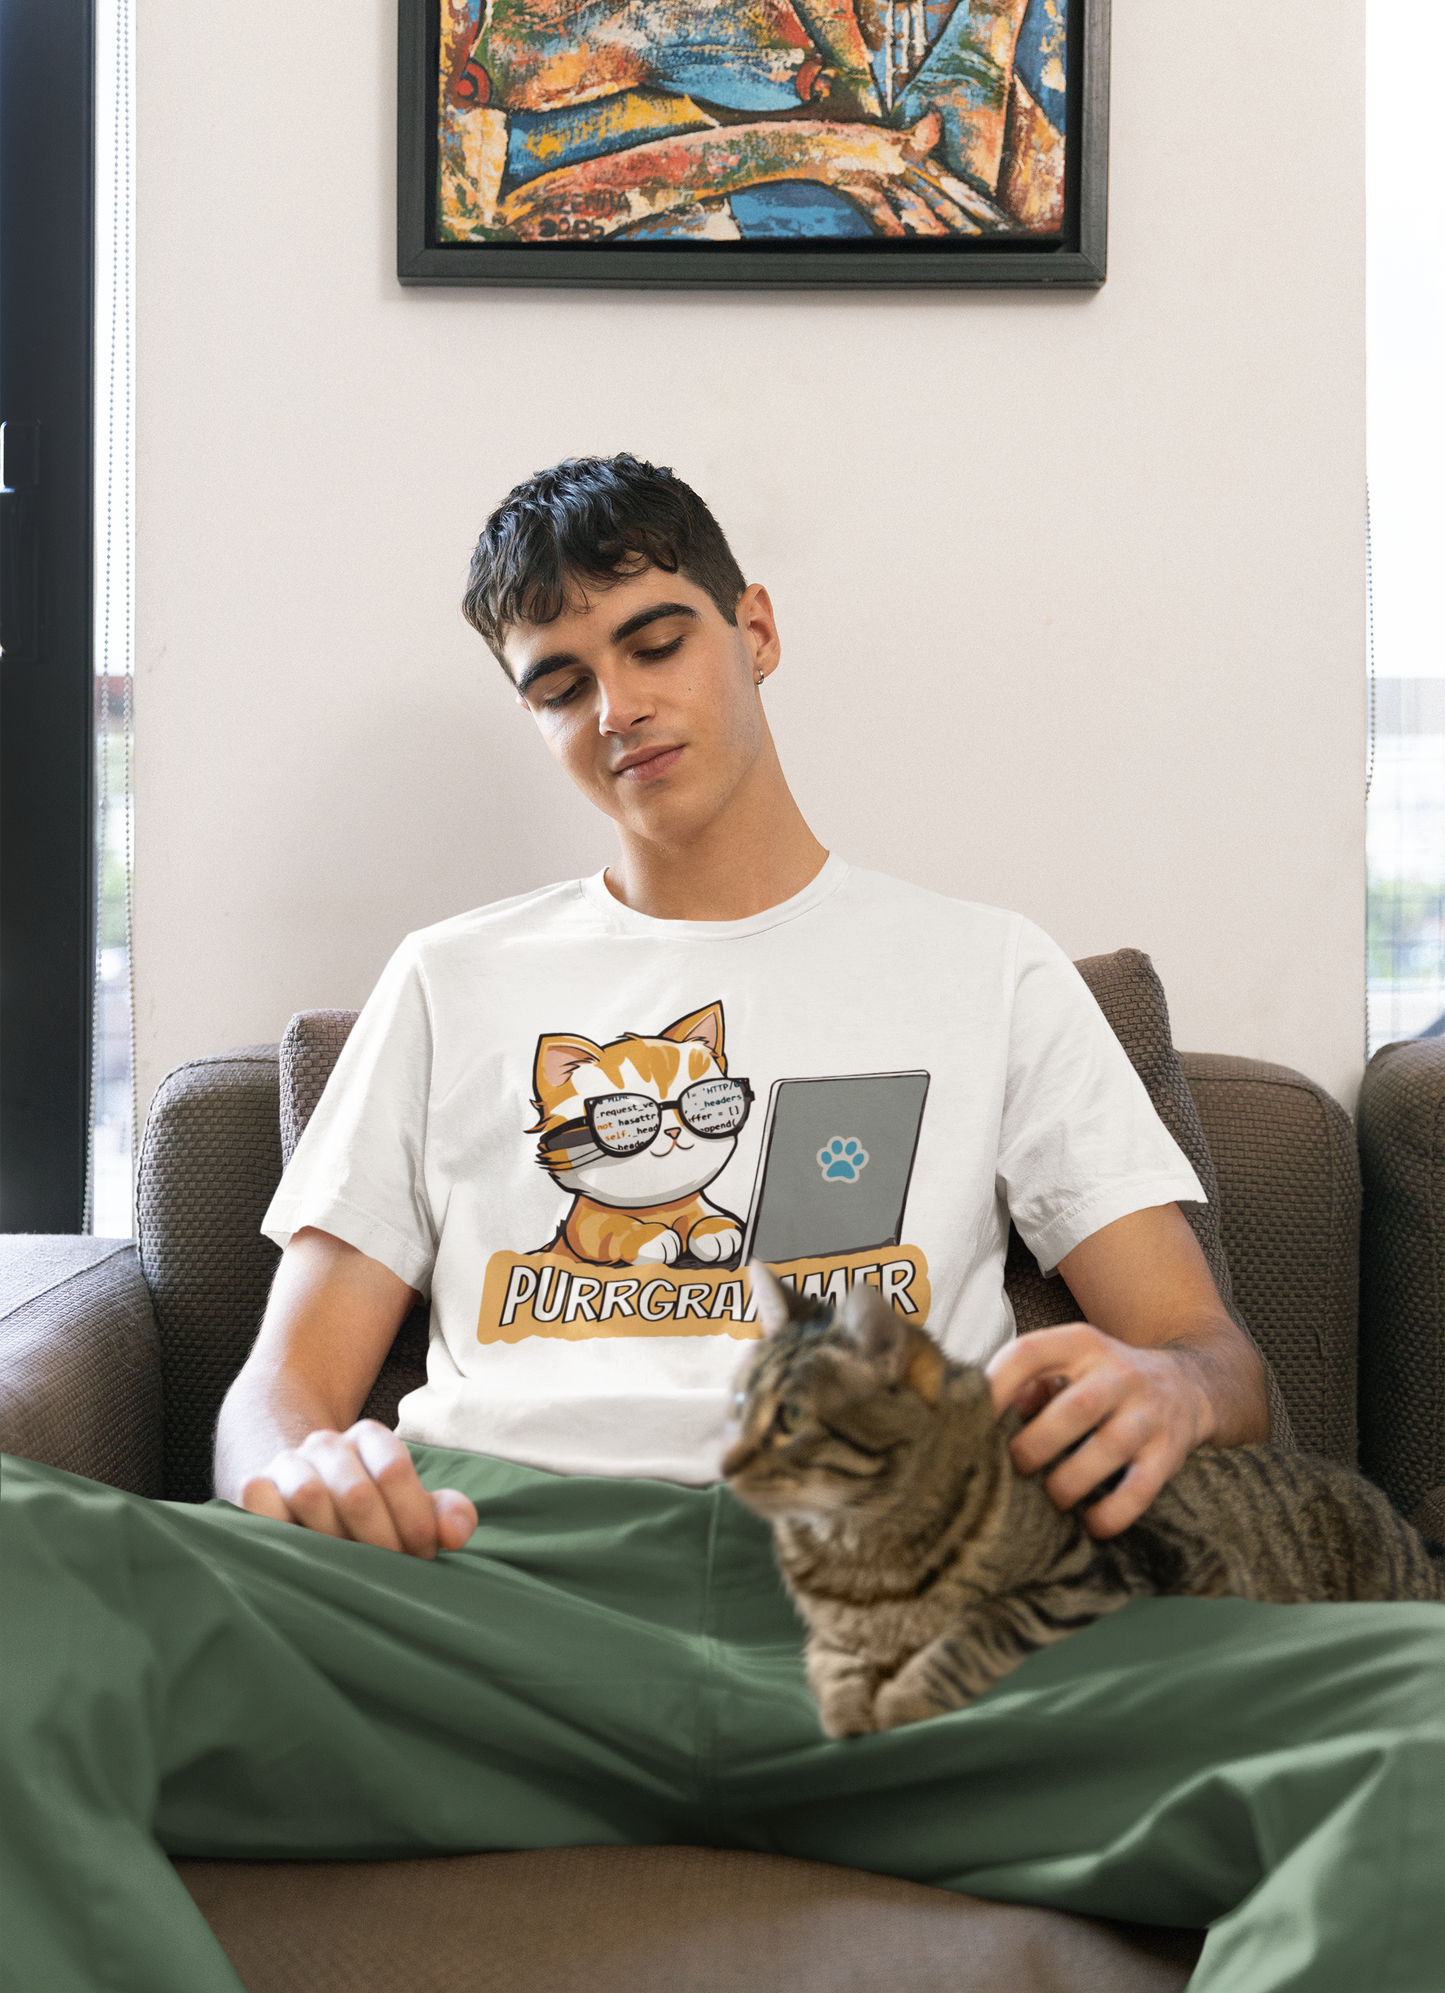 love for programming displayed on cat-themed shirt